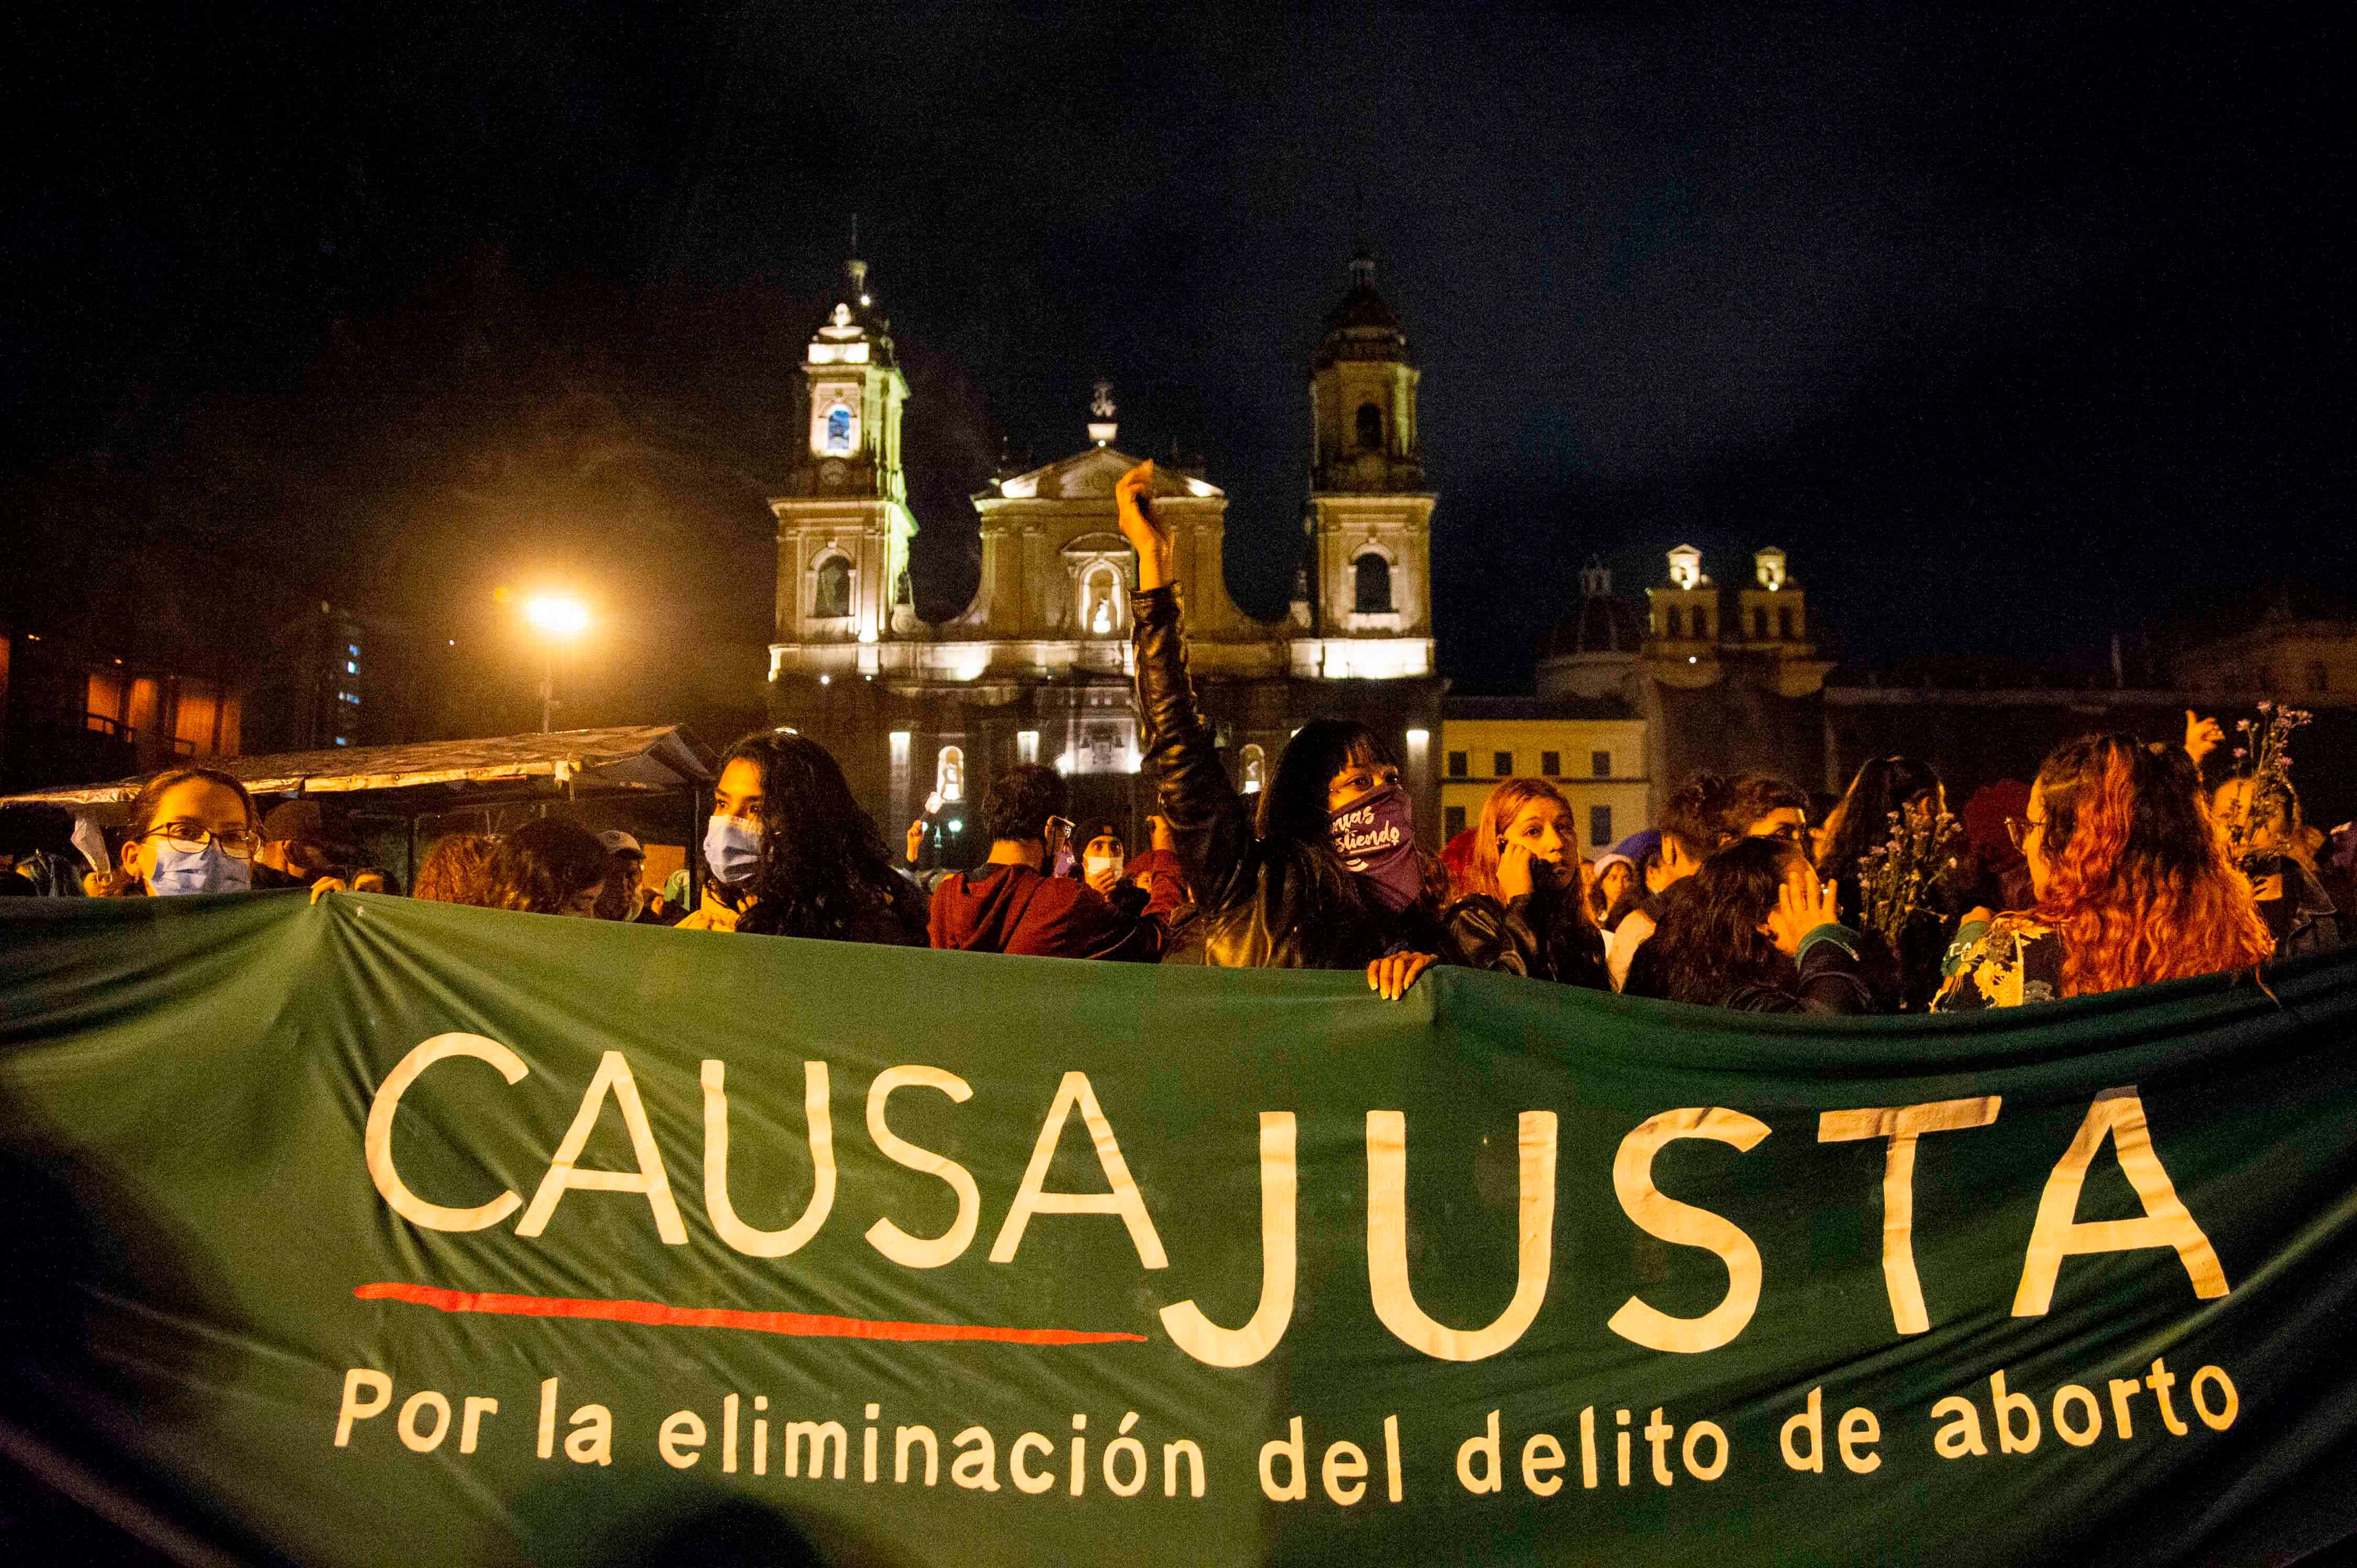 Members of the Pro-Abortion movement 'Causa Justa por el Aborto' take part during the International Day for the Elimination of Violence against Women demonstrations